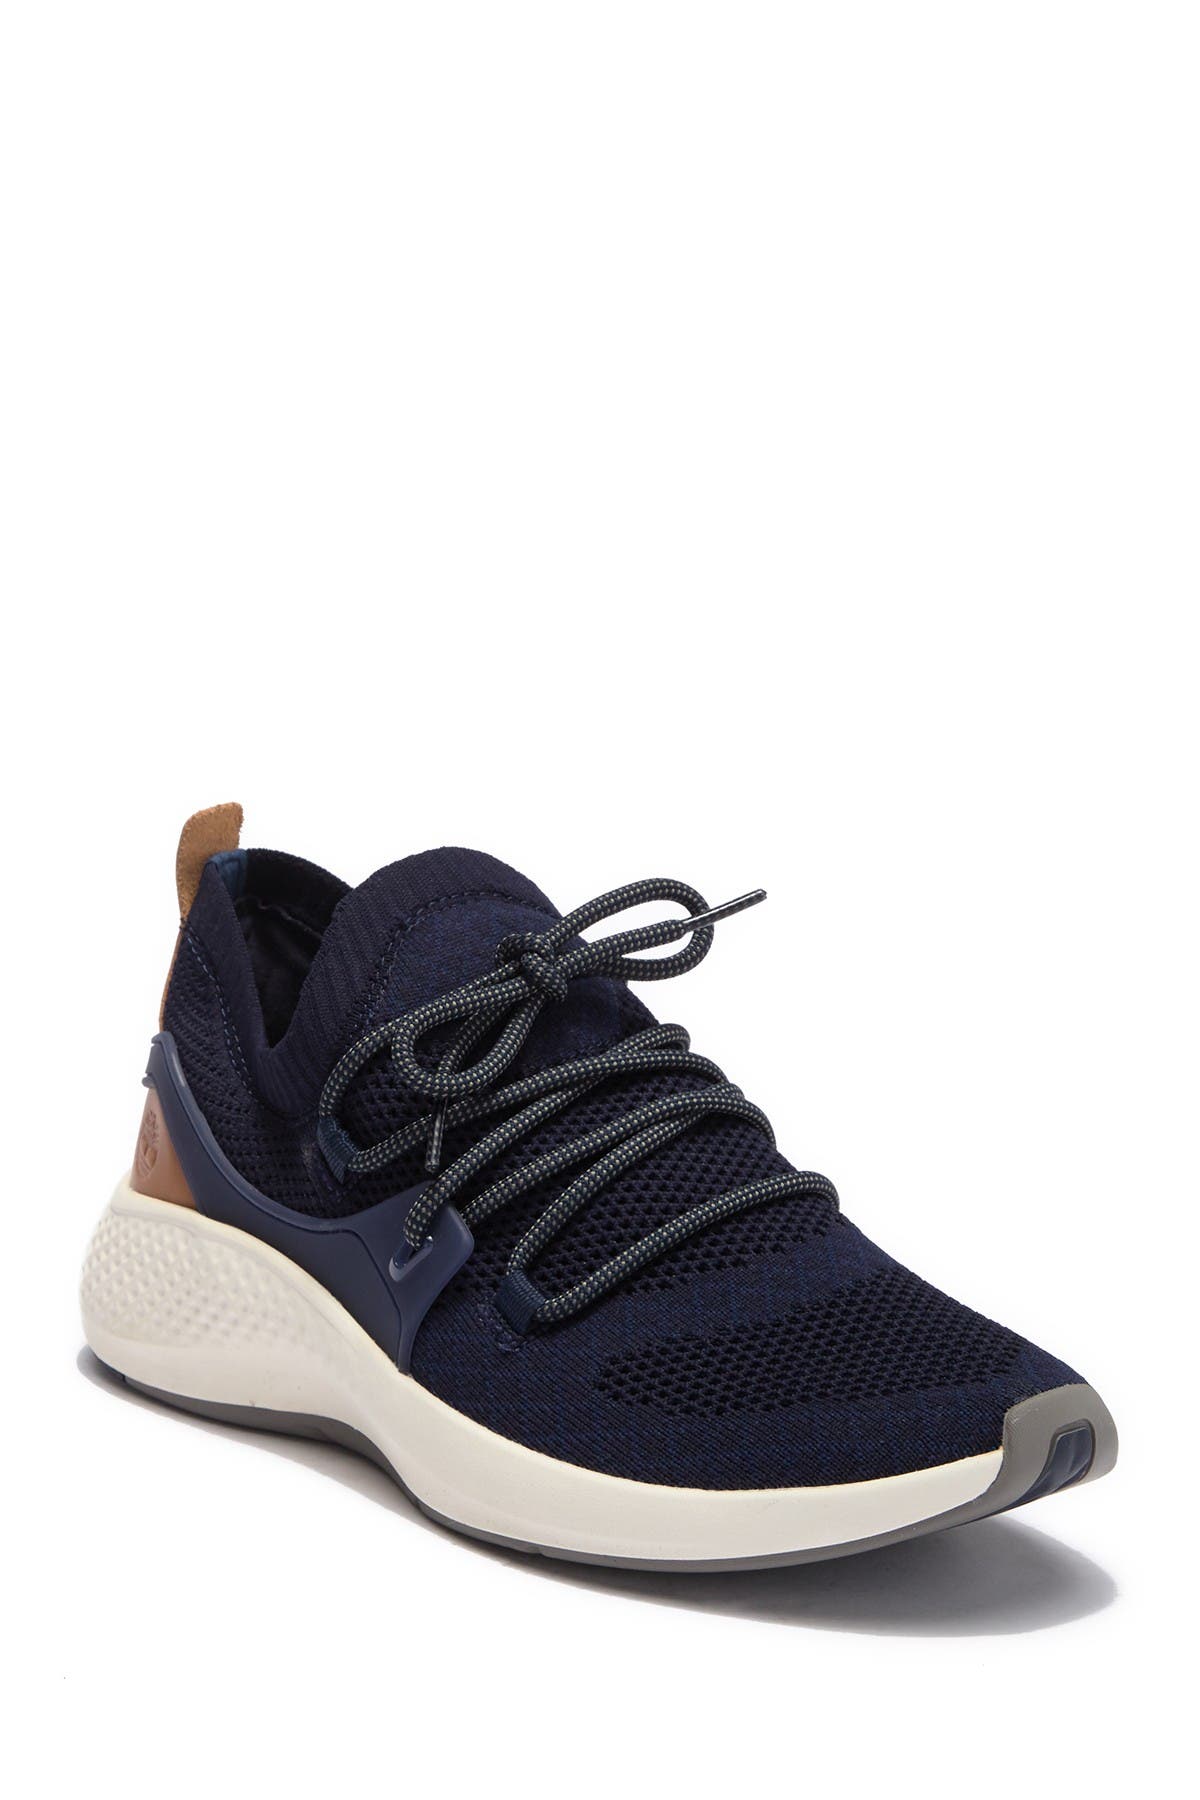 timberland knit sneakers